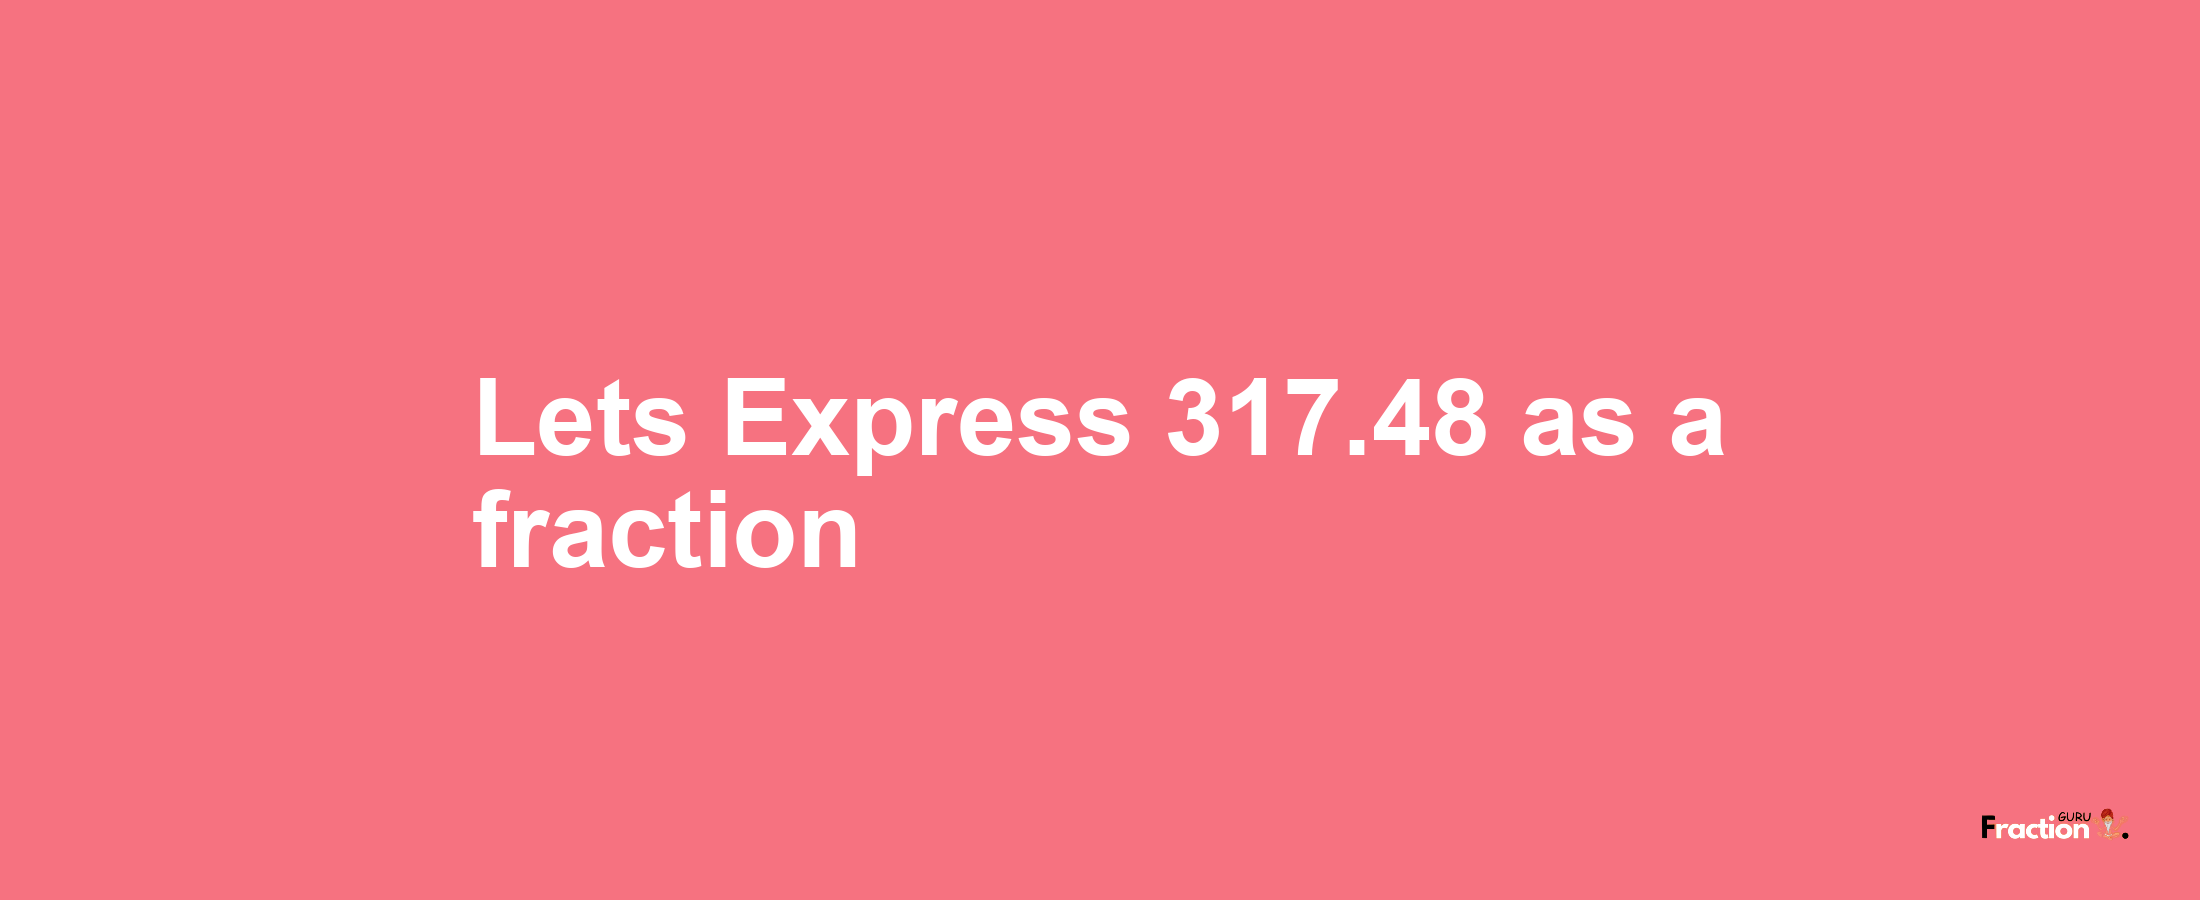 Lets Express 317.48 as afraction